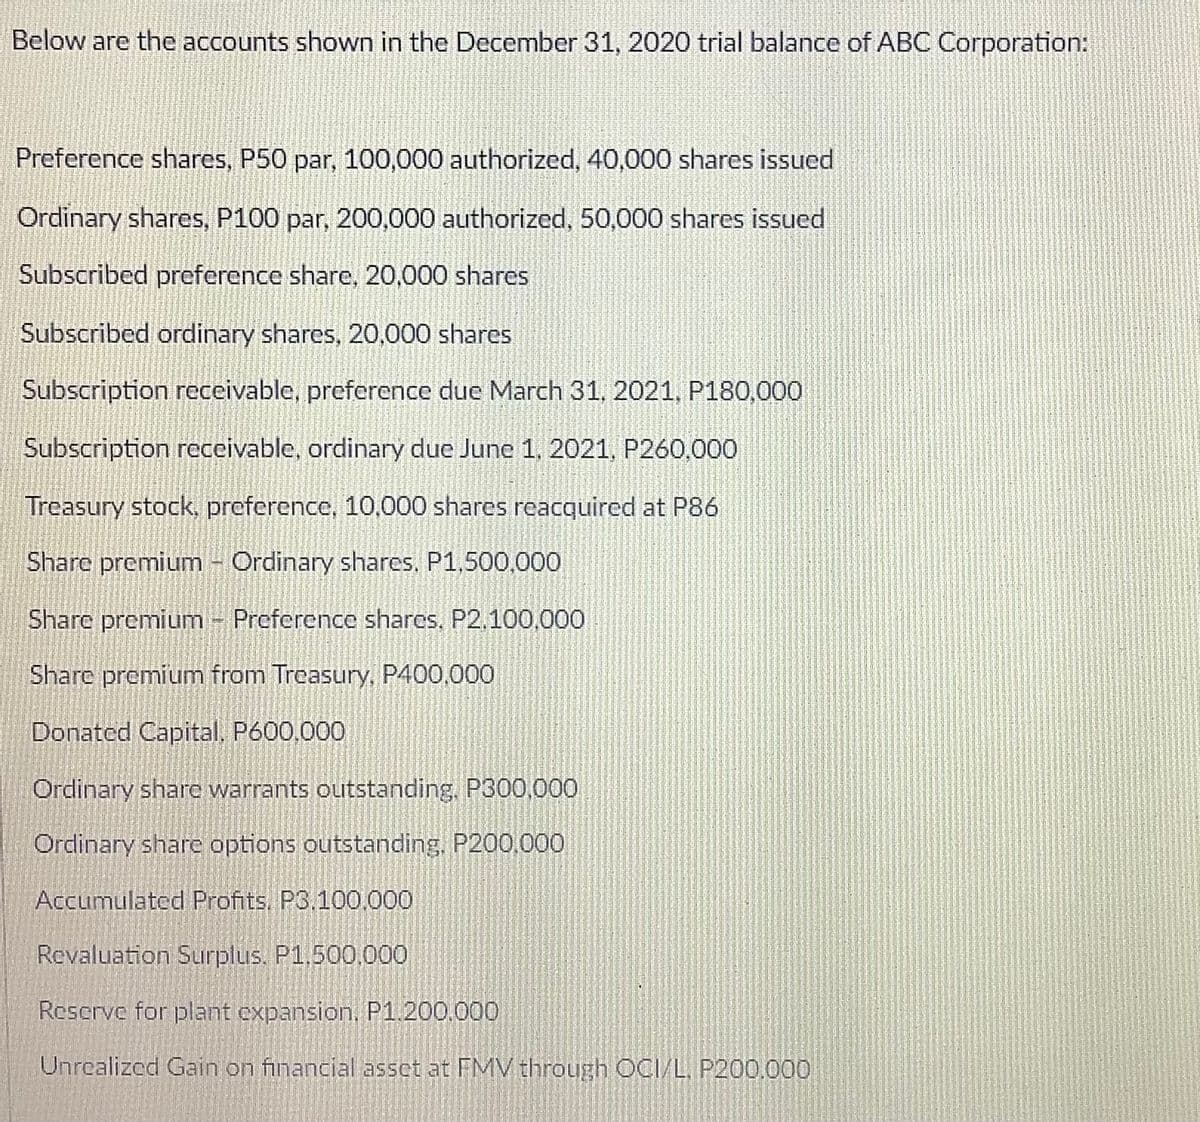 Below are the accounts shown in the December 31, 2020 trial balance of ABC Corporation:
Preference shares, P50 par, 100,000 authorized, 40,000 shares issued
Ordinary shares, P100 par, 200,000 authorized, 50,000 shares issued
Subscribed preference share, 20,000 shares
Subscribed ordinary shares, 20,000 shares
Subscription receivable, preference due March 31, 2021, P180,000
Subscription receivable, ordinary due June 1, 2021, P260,000
Treasury stock, preference, 10,000 shares reacquired at P86
Share premium - Ordinary shares, P1,500,000
Share premium Preference shares, P2.100,000
Share premium from Treasury, P400,000
Donated Capital, P600,000
Ordinary share warrants outstanding. P300,000
Ordinary share options outstanding. P200,000O
Accumulated Profits. P3,100.000
Revaluation Surplus. P1,500,000
Reserve for plant expansion, P1.200.000
Unrealized Gain on financial asset at FMV through OCI/L. P200,000
